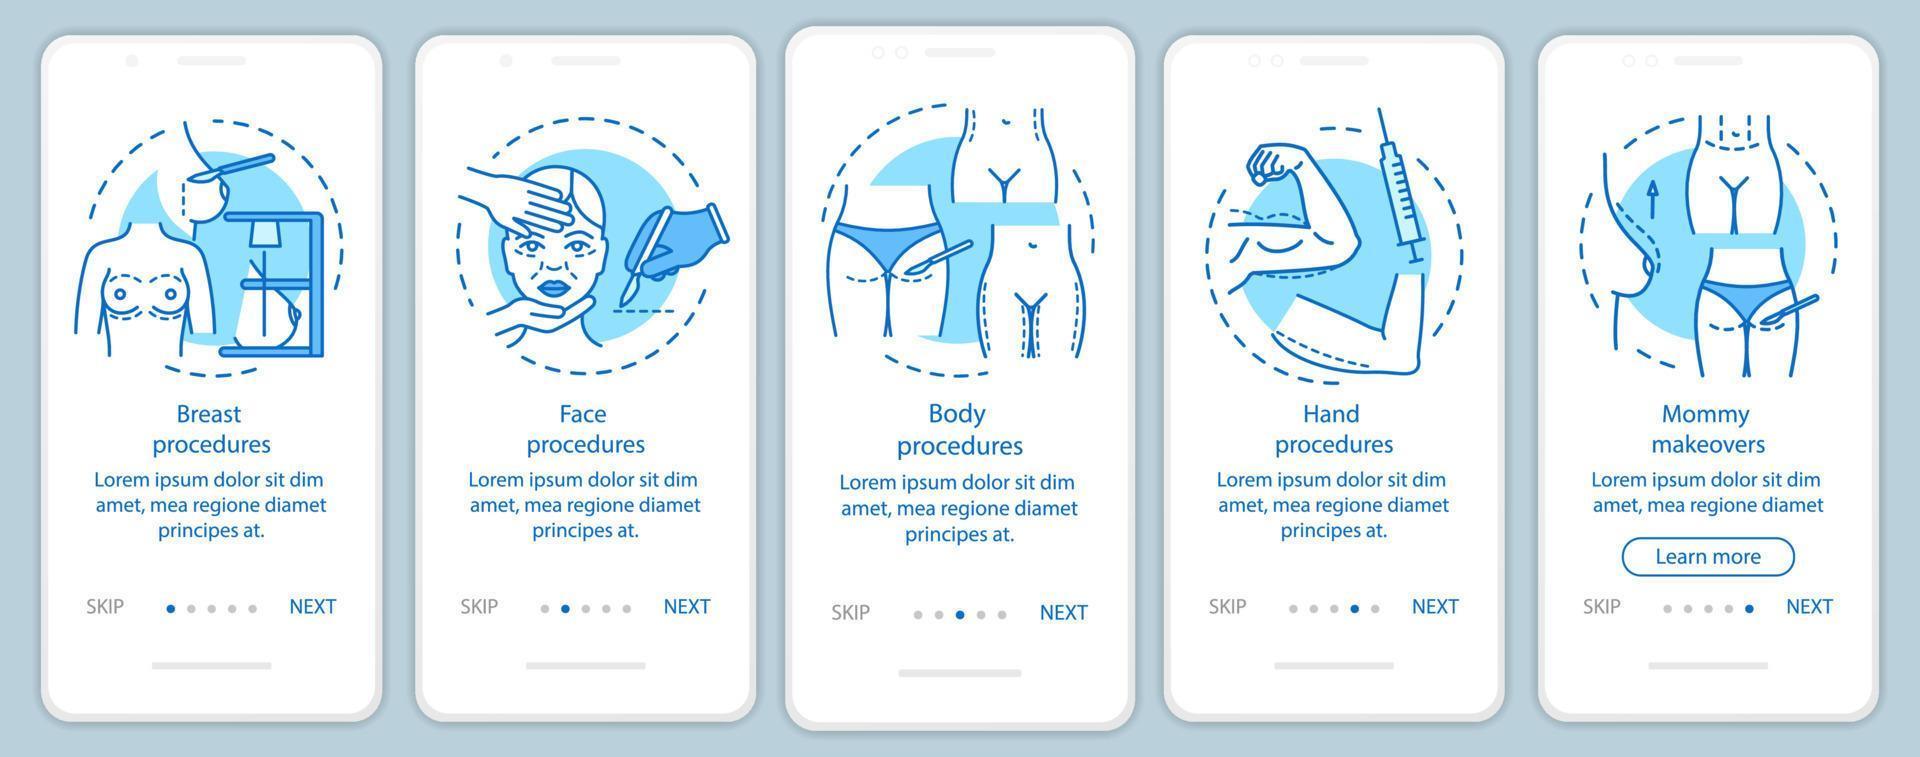 Plastic surgery center procedures onboarding mobile app page screen with linear concepts. Five walkthrough steps graphic instructions. Body procedures. UX, UI, GUI vector template with illustrations